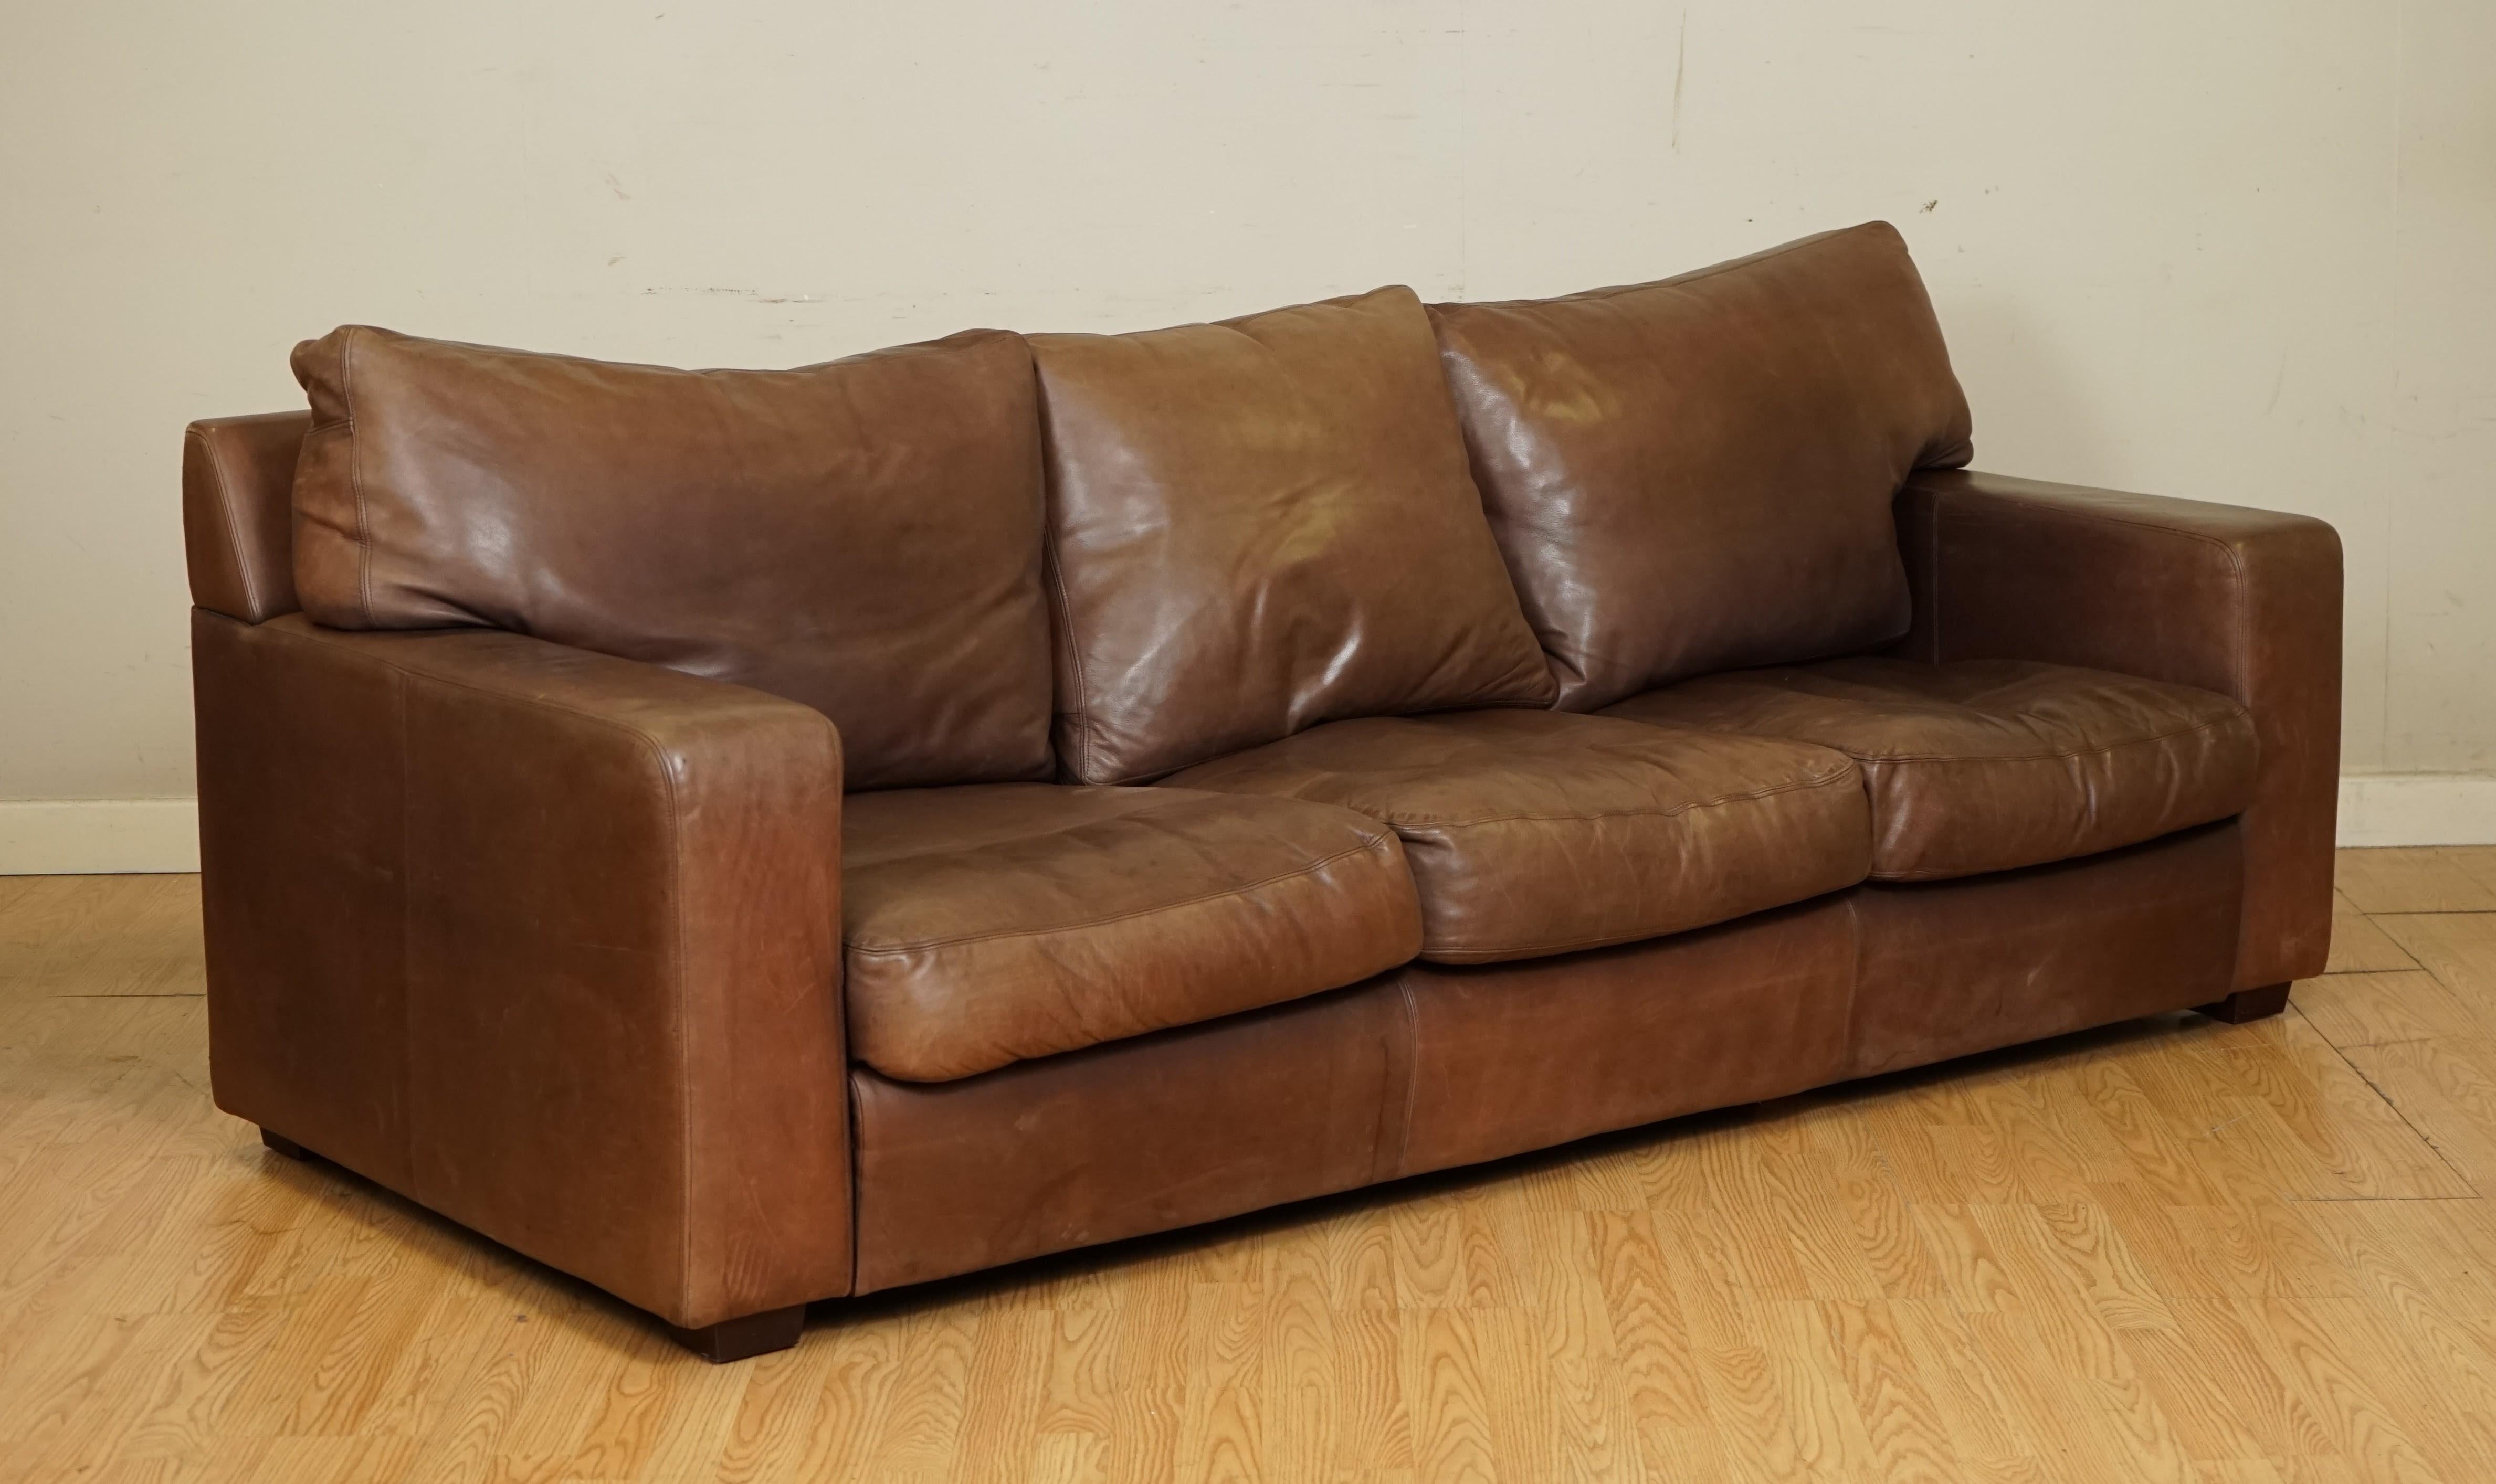 We are so excited to present to you this beautiful buttery soft leather Collins & Hayes Sofa.

This sofa is a very well made a solid piece. The arms are removable, so it can manoeuvre better to get inside your home and the back cushions are